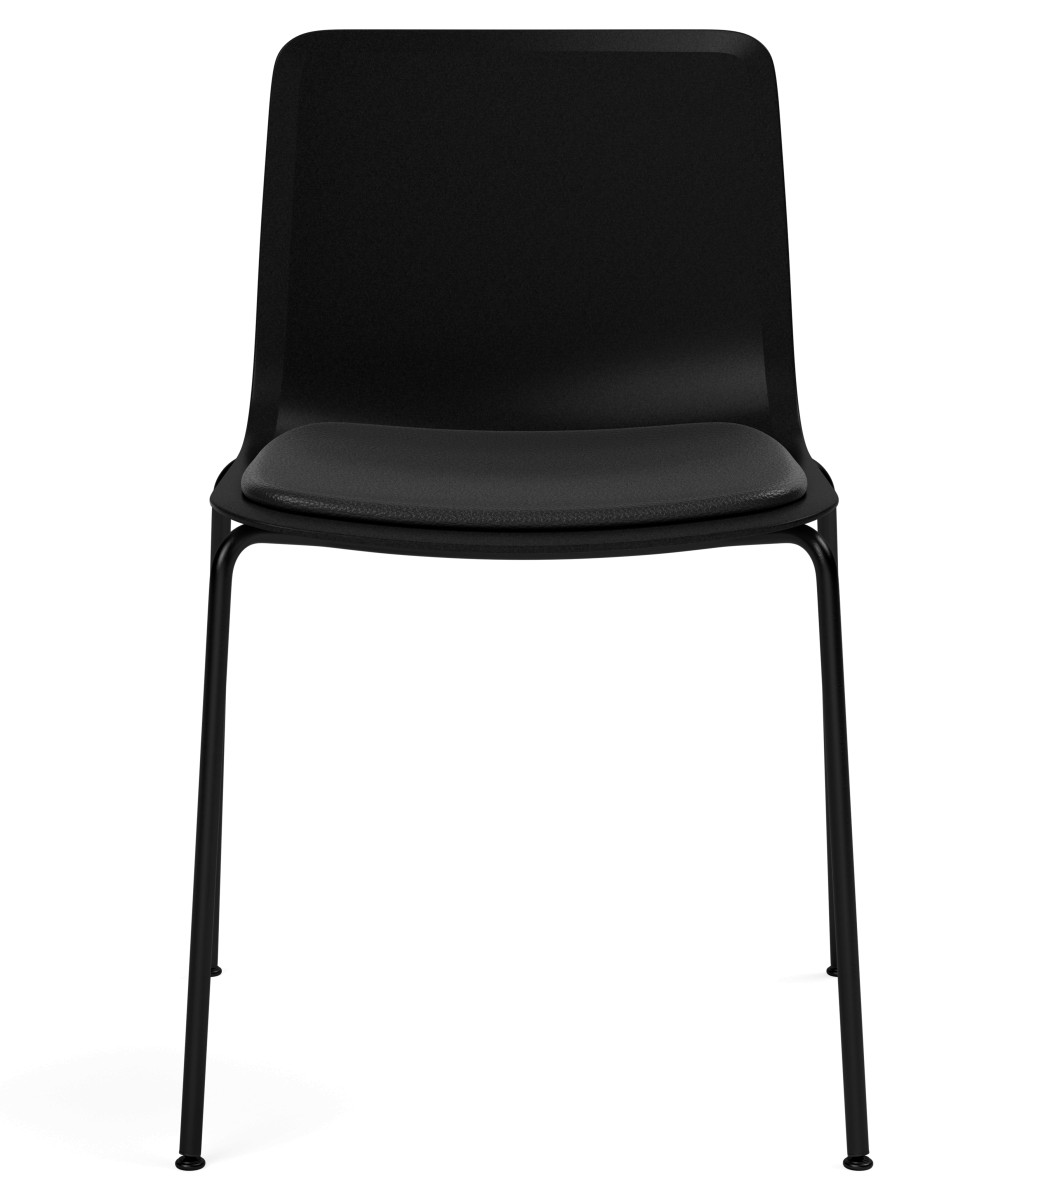 Pato 4 Leg Chair - Seat Upholstered | Fredericia | CHANINTR